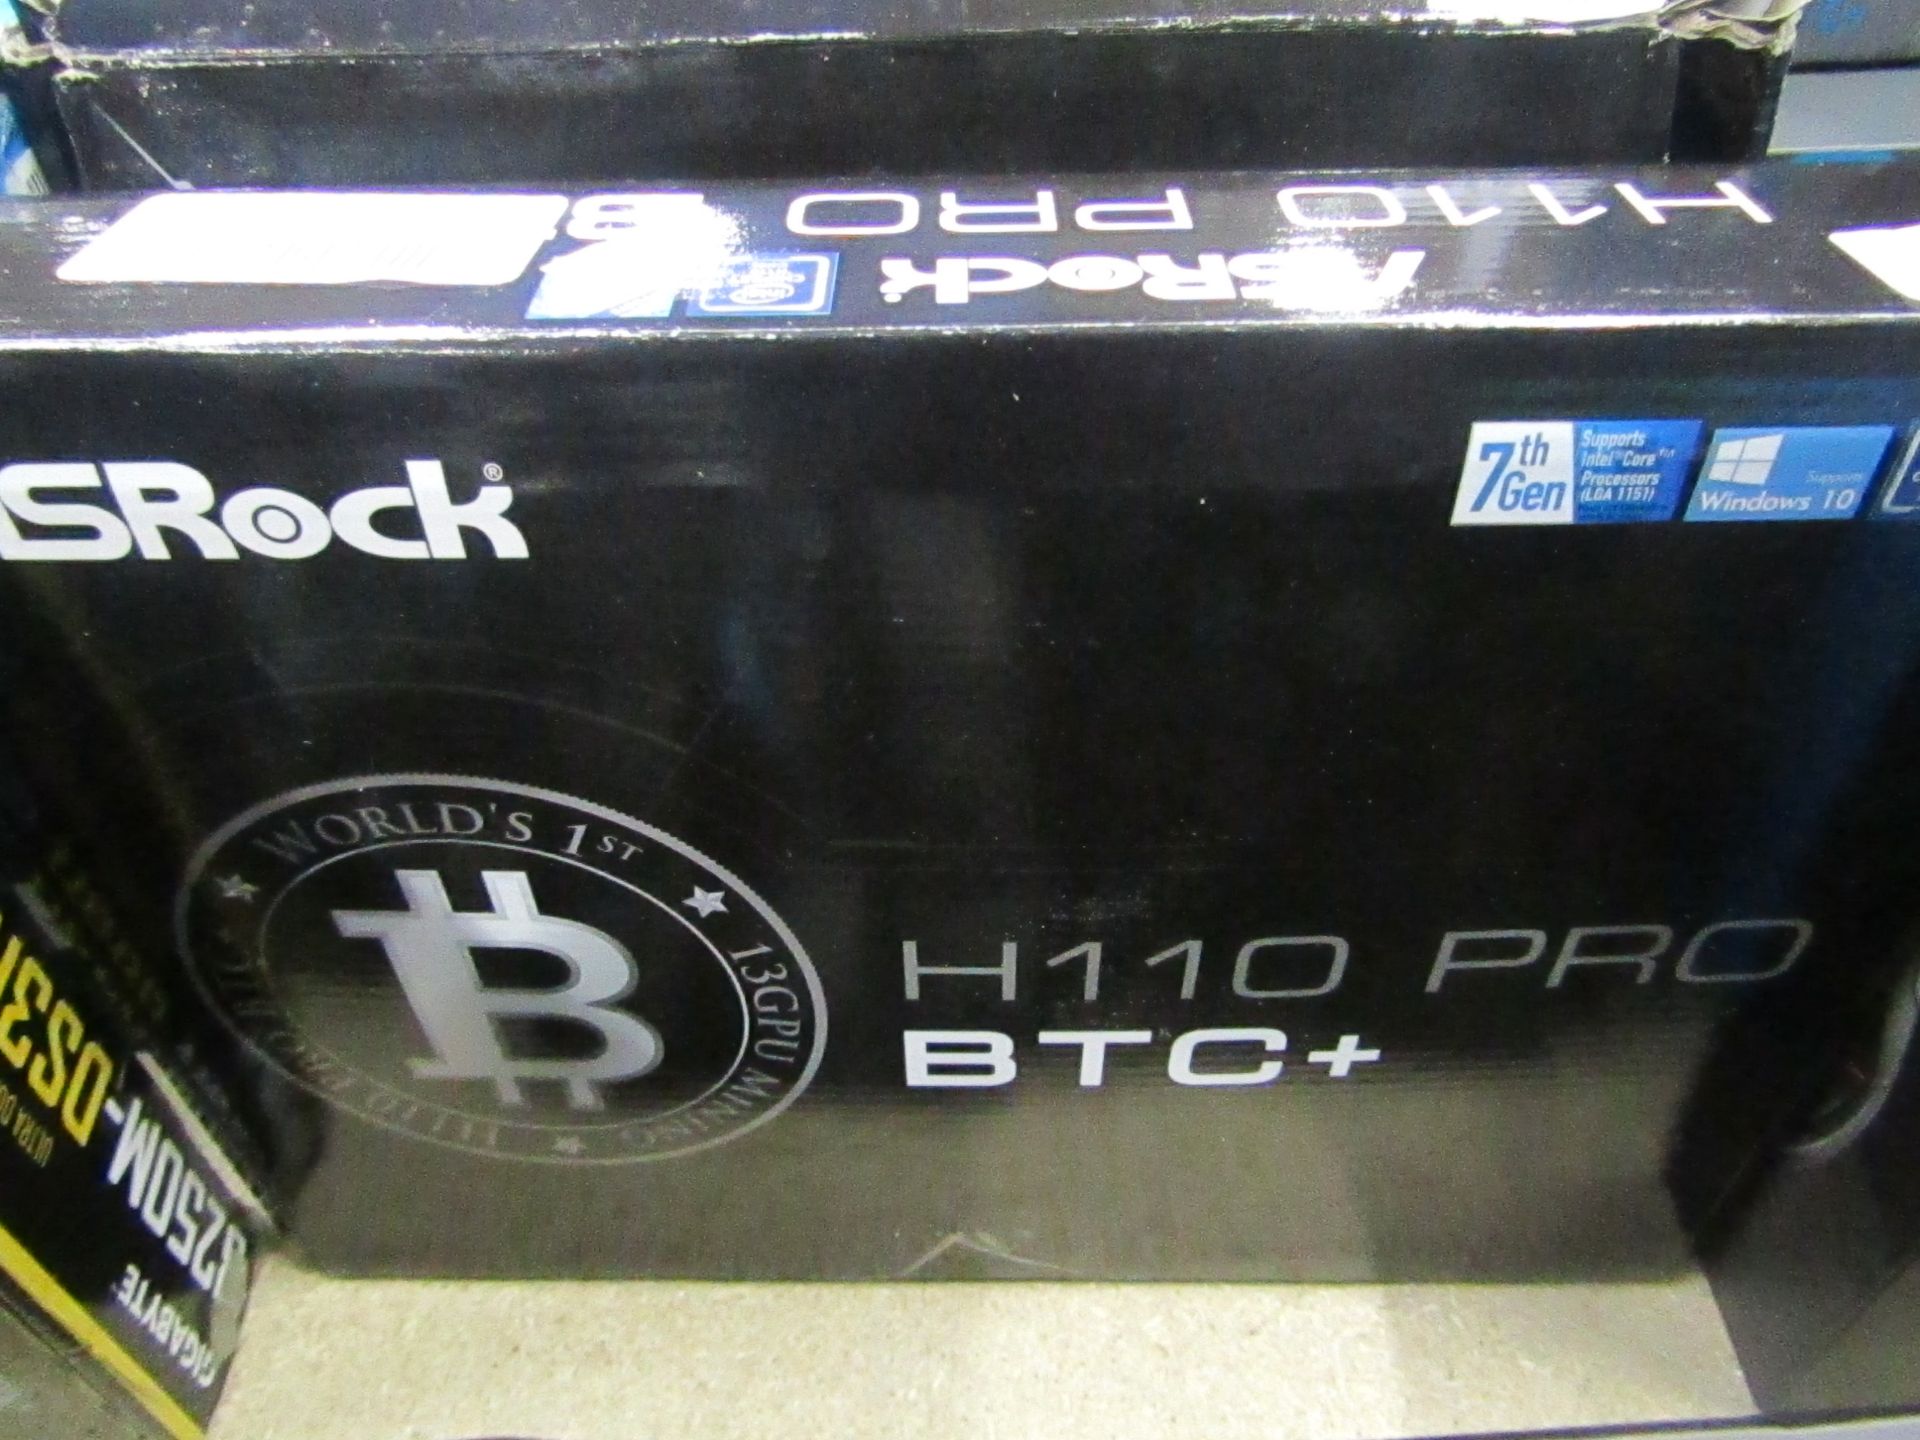 ASRock H110 Pro BTC+ motherboard, untested and boxed.